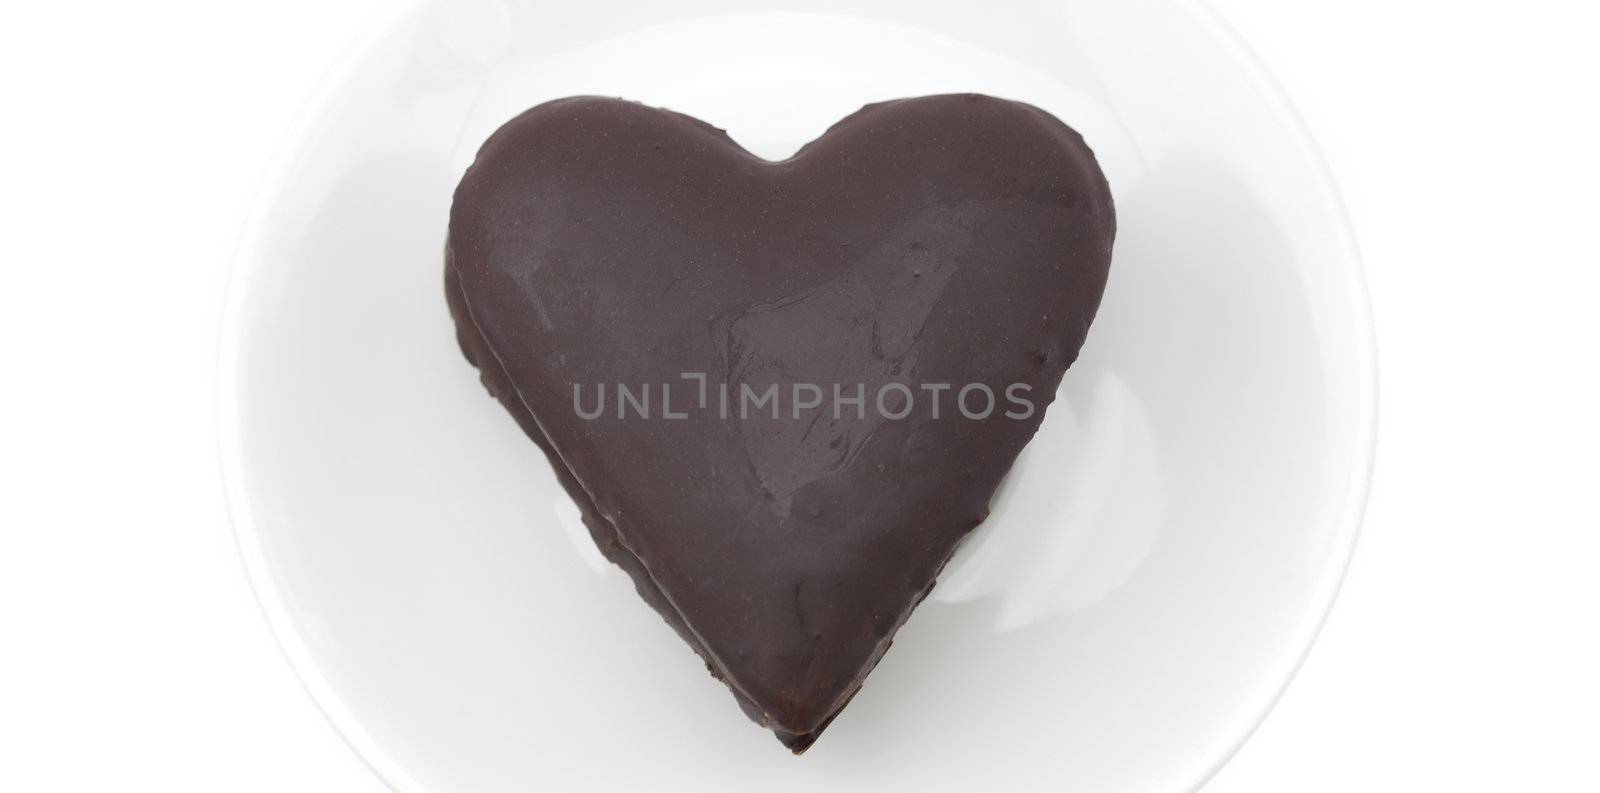 cake in a heart isolated on white